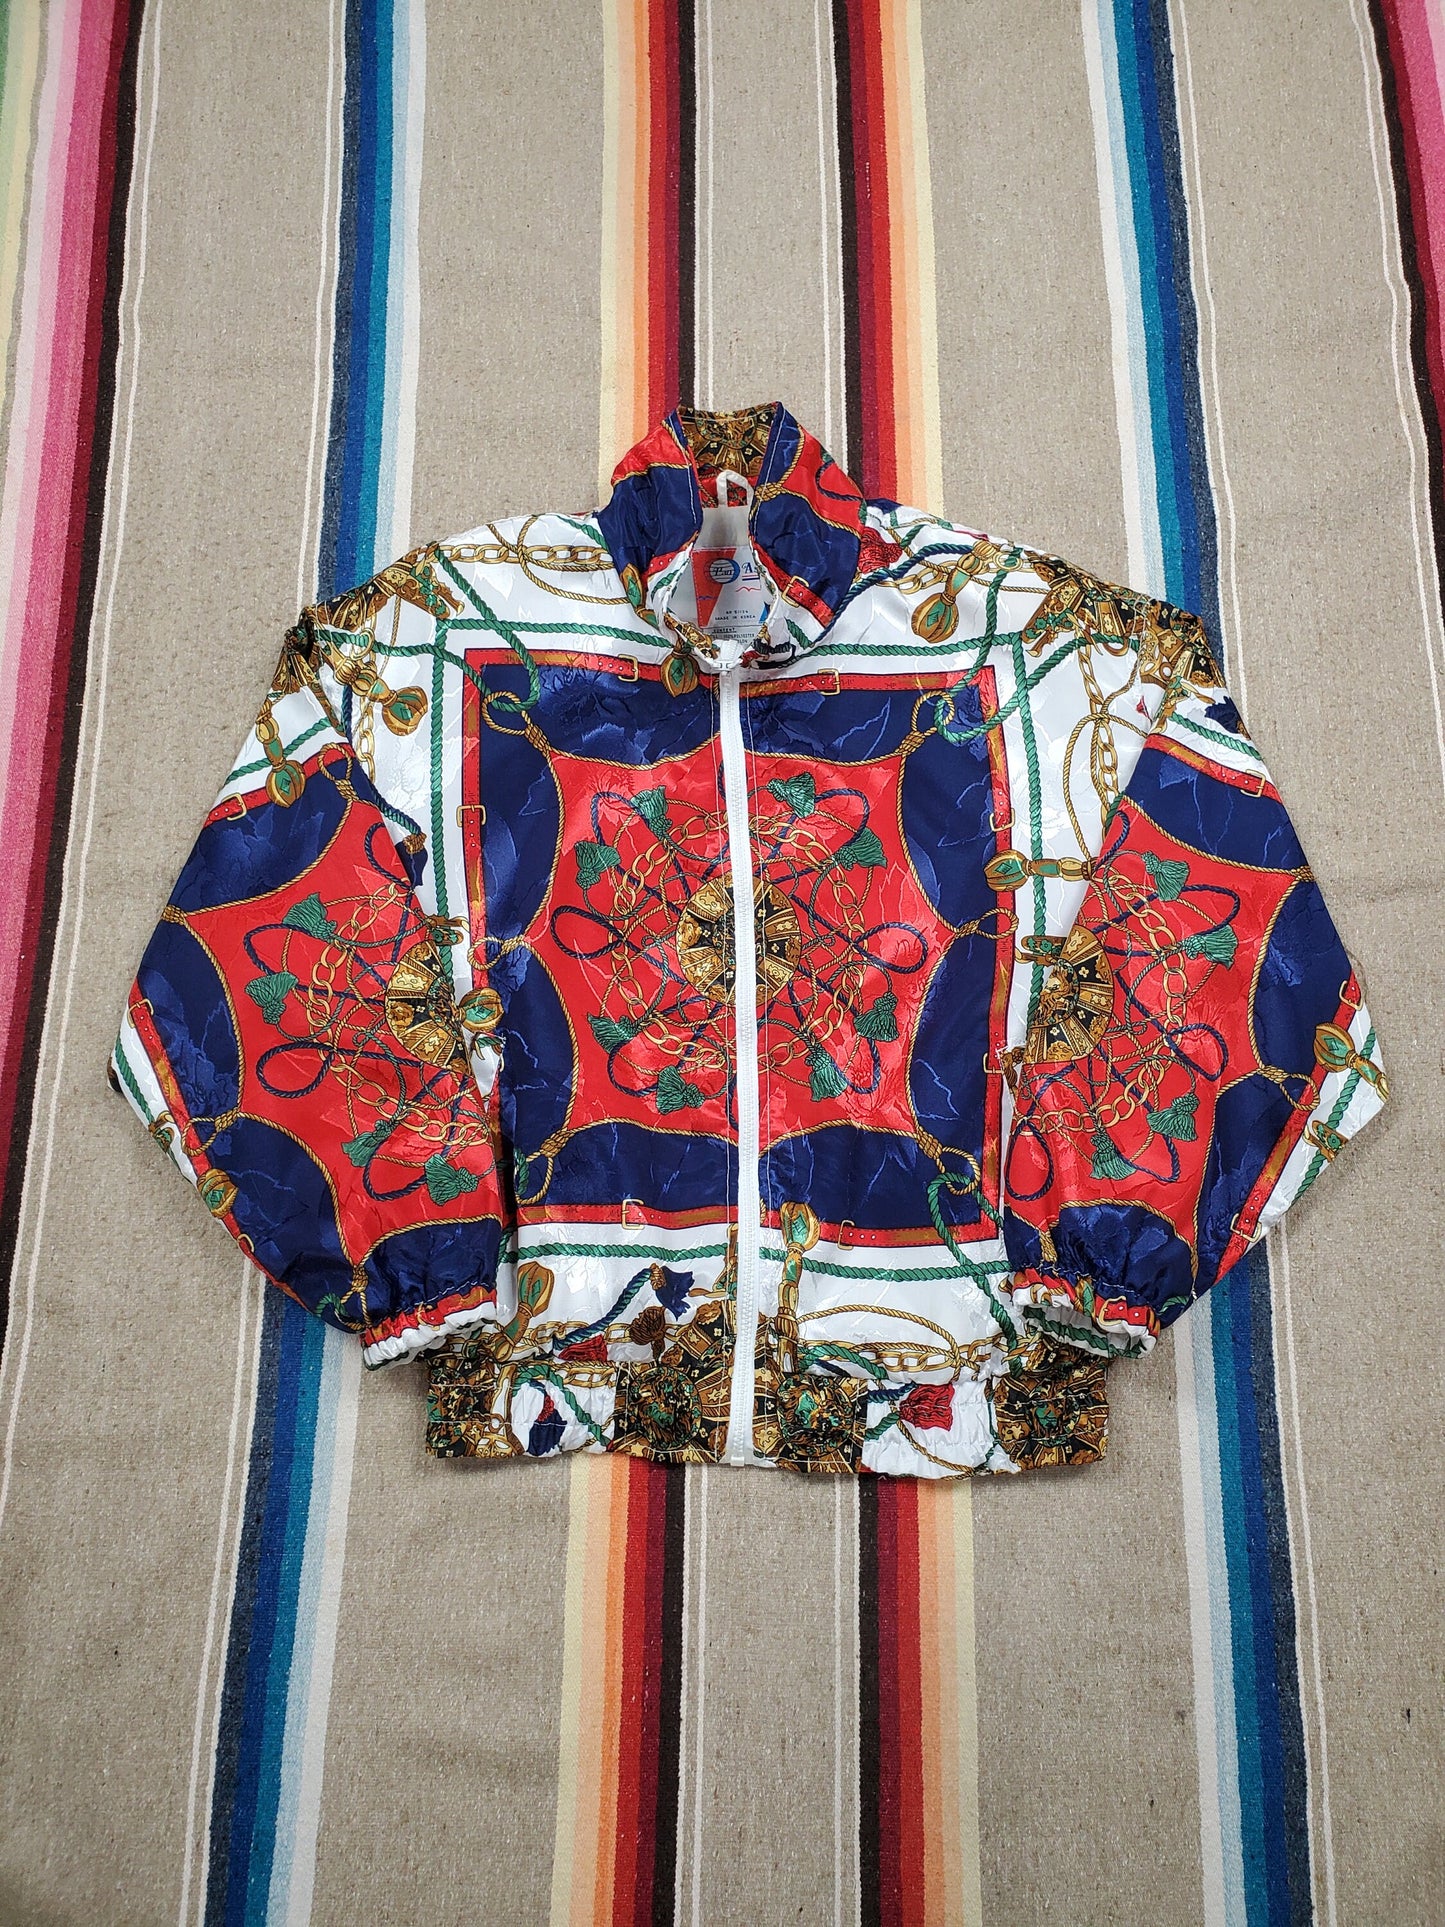 1980s/1990s Pan Asia Red & Blue Tassles Silk Scarf Style Nylon Jacket Size M/L